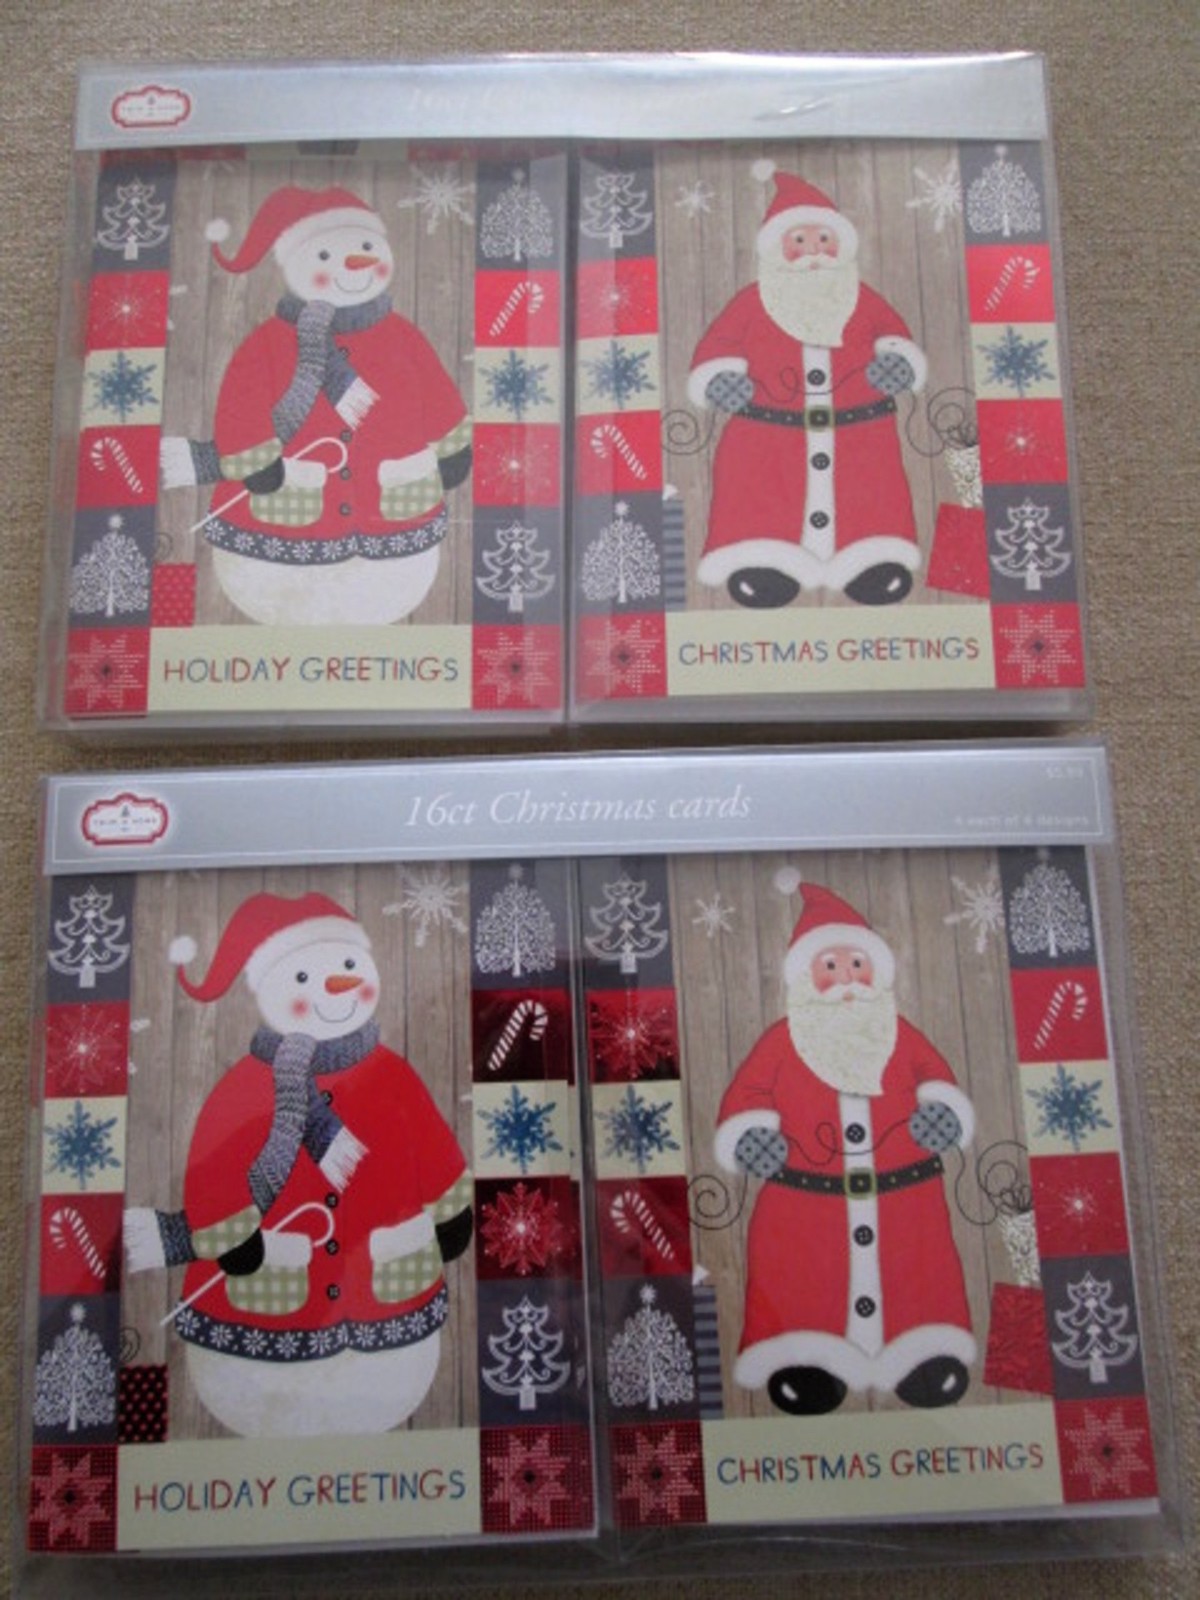 Lot of Two New Boxes of Trim A Home Christmas Cards See Entire Description - $10.95